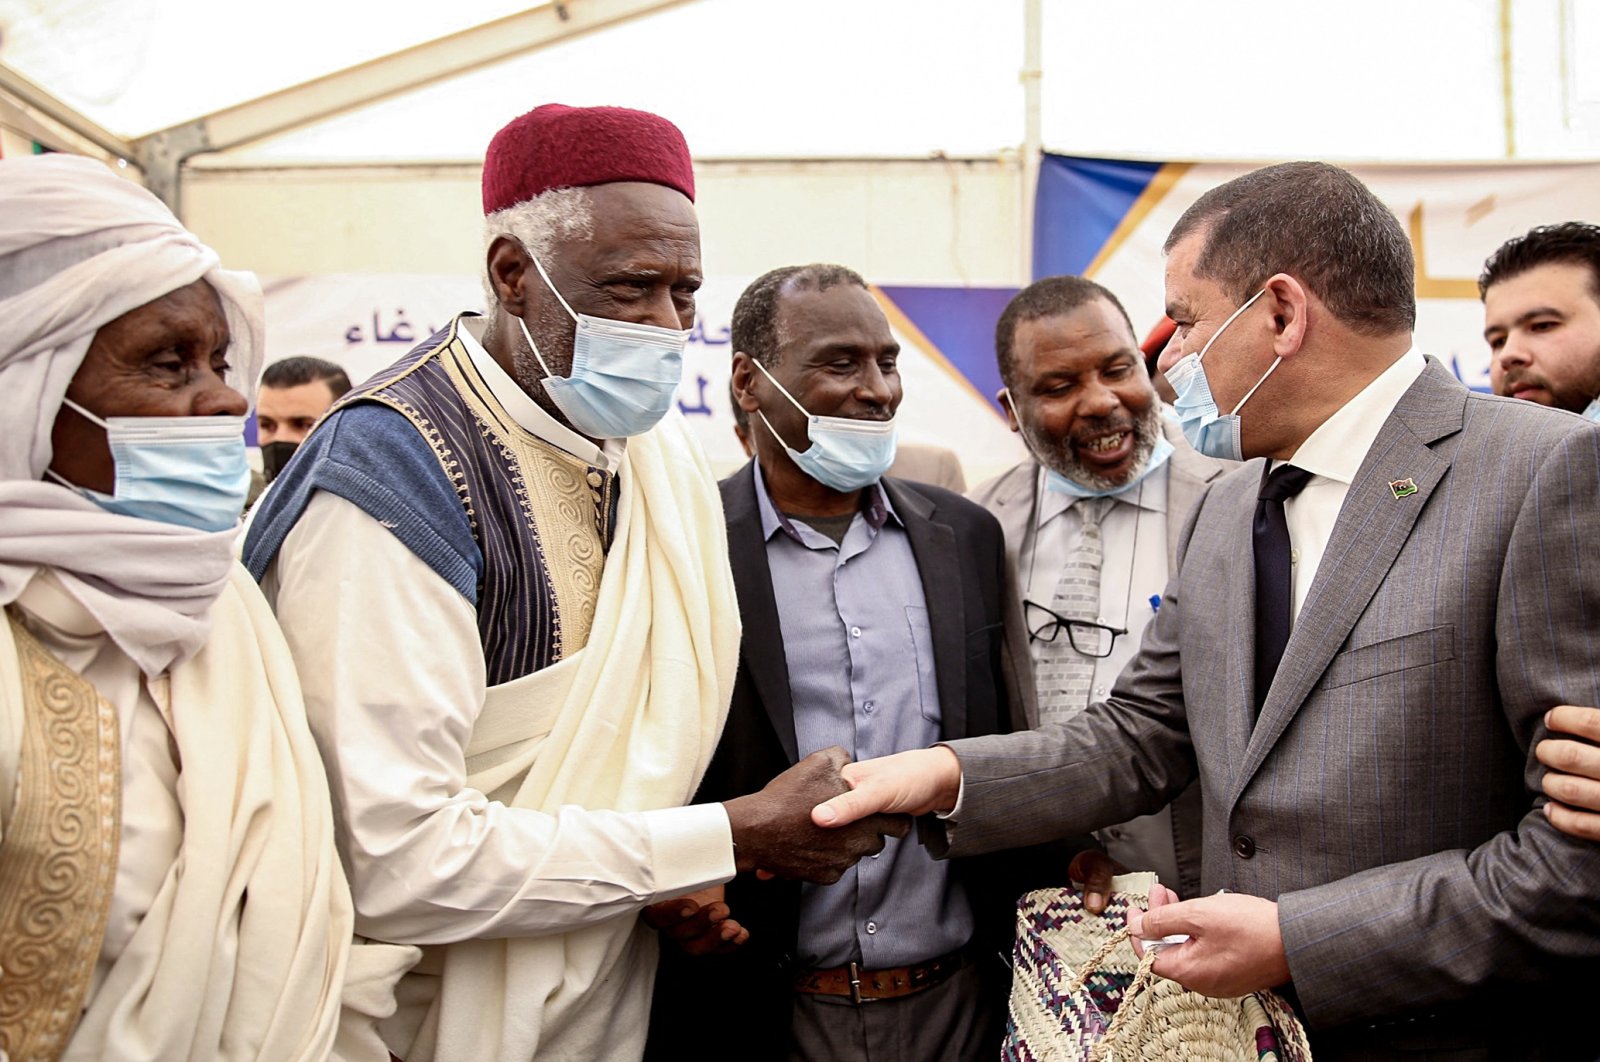 Libyan Prime Minister Abdul Hamid Dbeibah (R) shakes hands with elders at a rally during his visit to Tawergha, some 200 kilometers (125 miles) east of Libya's capital close to the port city of Misrata, April 3, 2021. (AFP Photo)